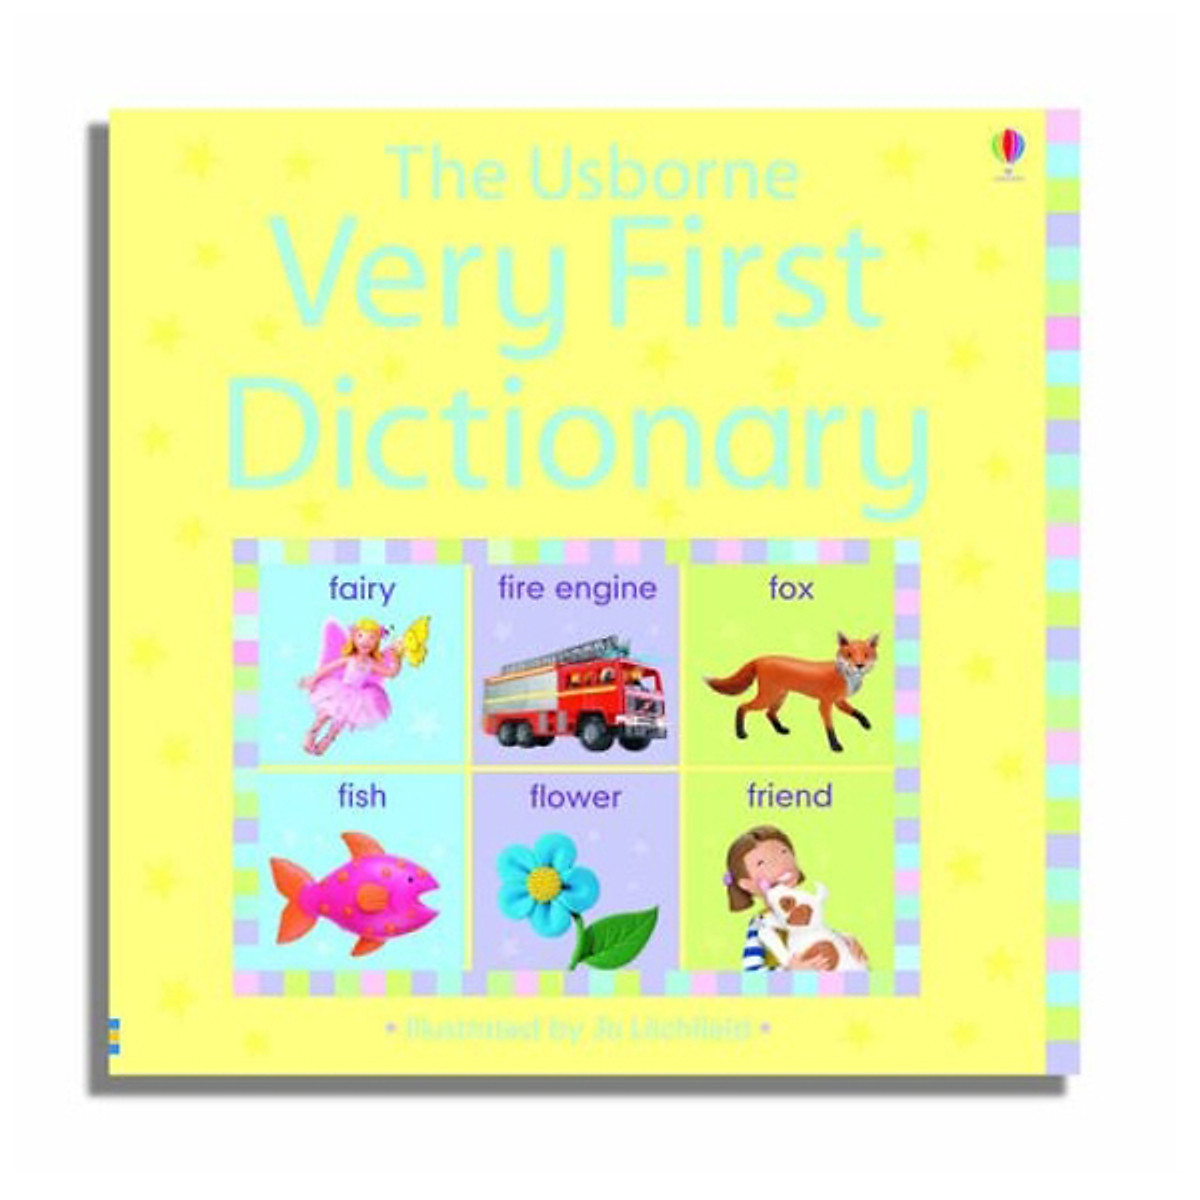 First dictionary. Young Learners first Dictionary. Child's first Dictionary a Sunbird book. Young Learners first Dictionary Alligator books. A submire book child's first Dictionary.